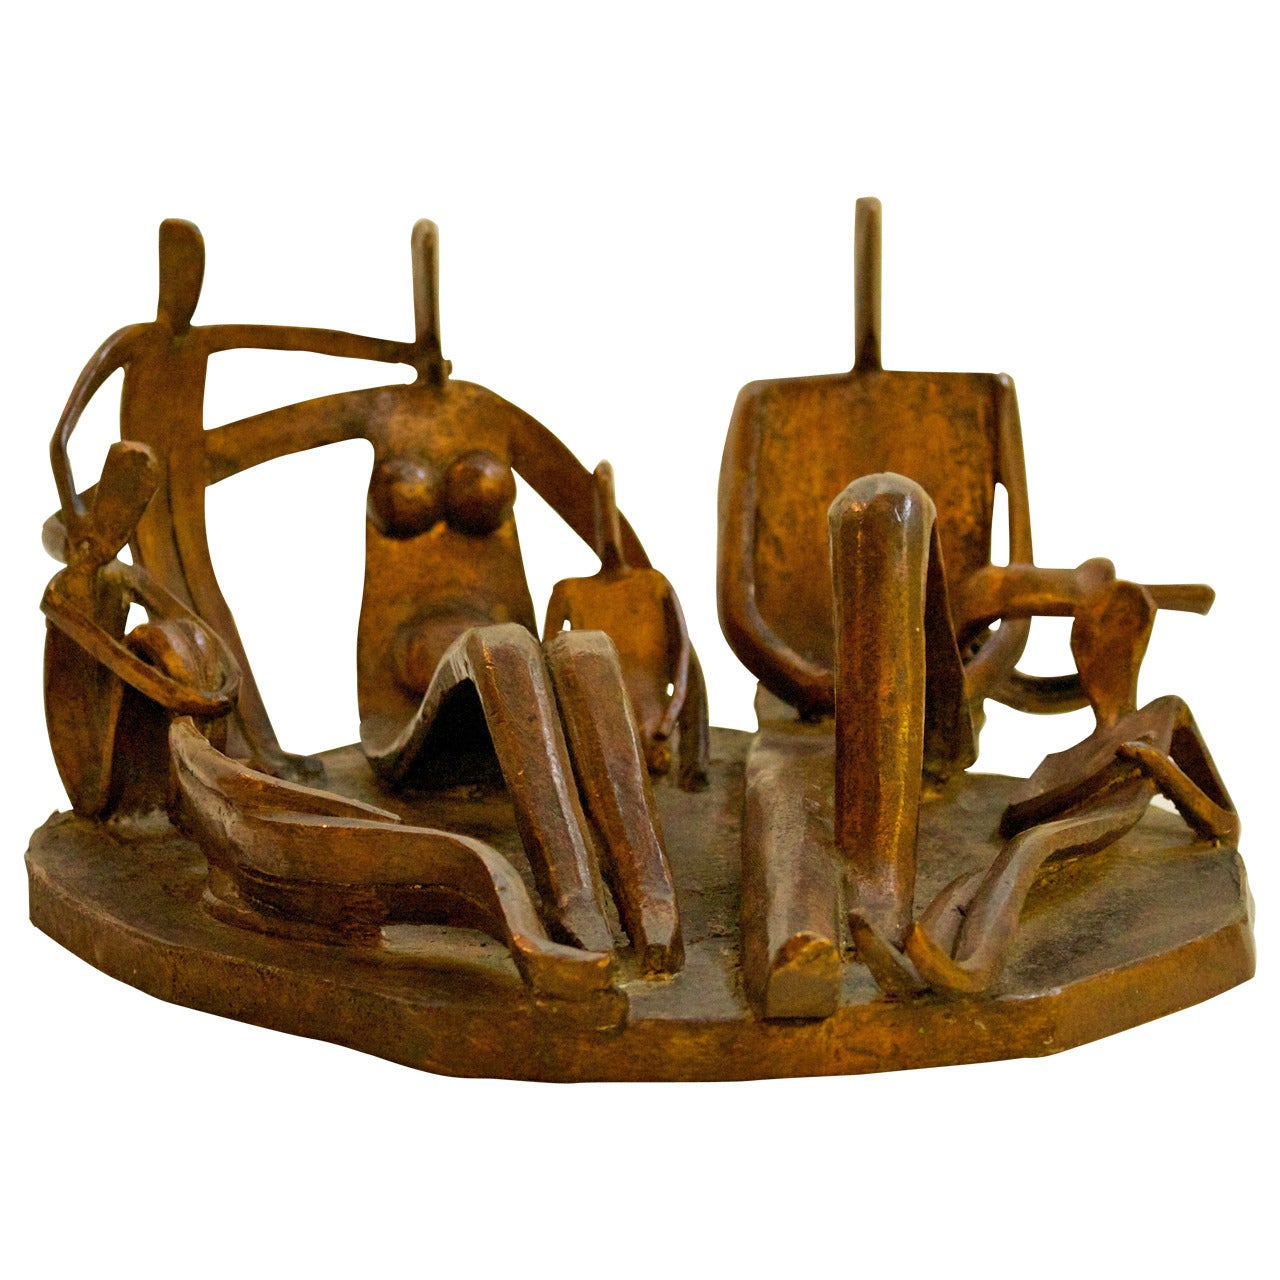 Modernist Bronze Abstract Sculpture by Dudley Pratt Entitled "The Family" 1954 For Sale